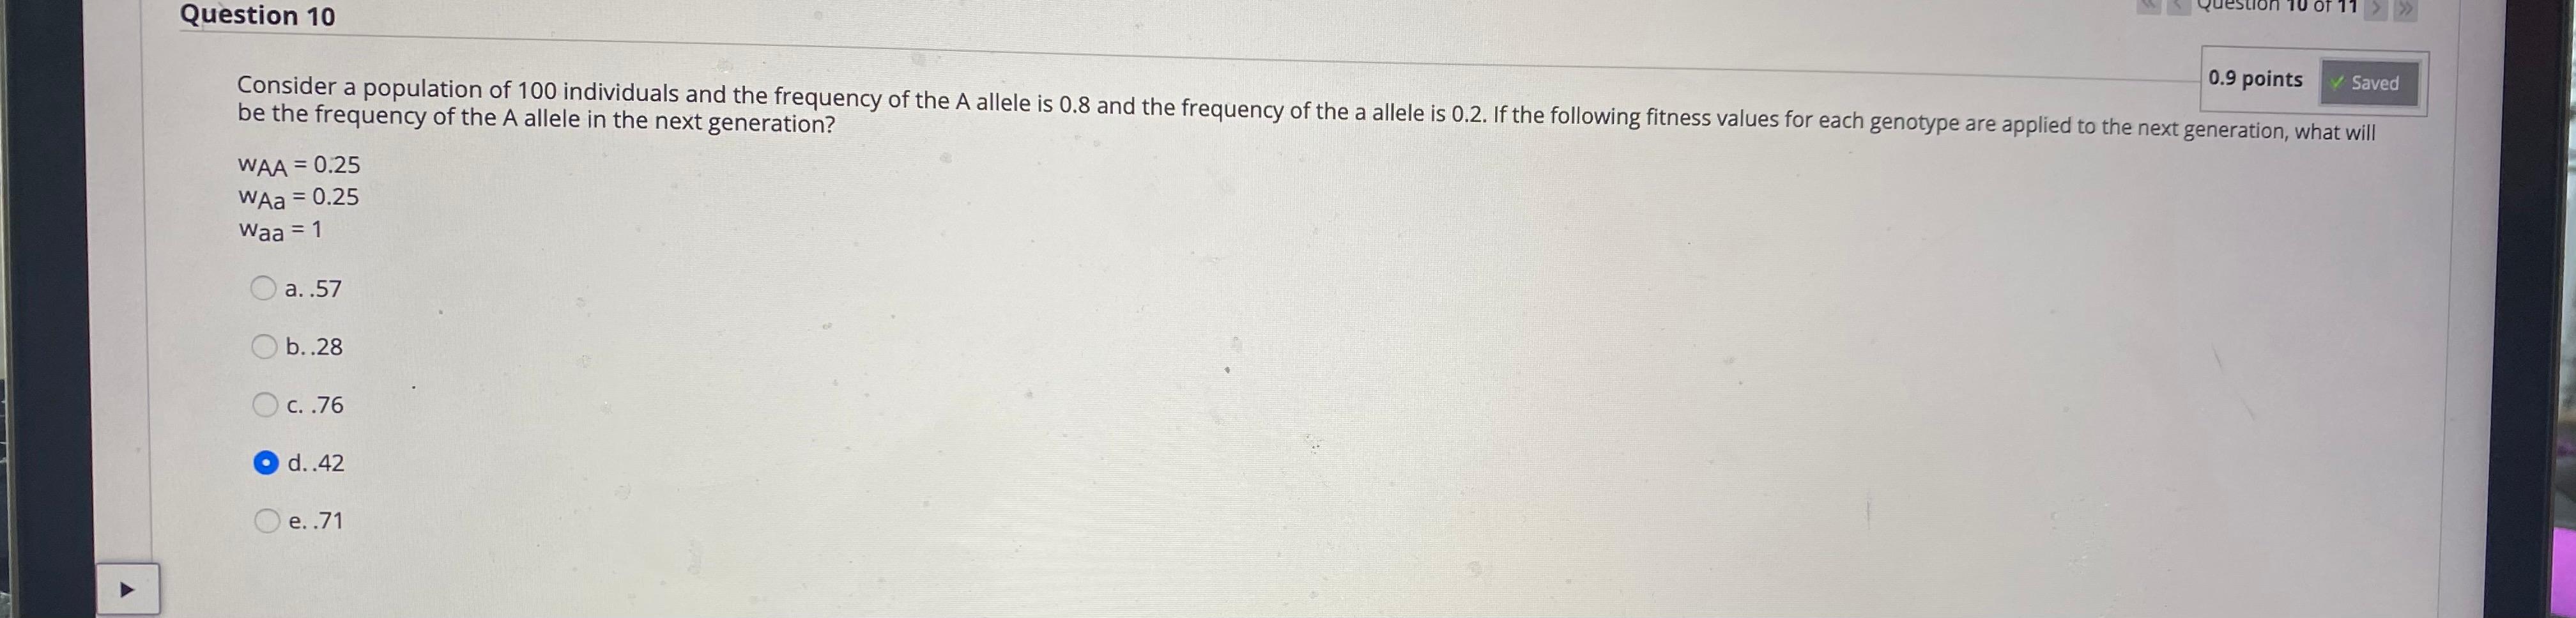 Question 10 OT 11 0.9 points Saved Consider a population of 100 individuals and the frequency of the A allele is 0.8 and the